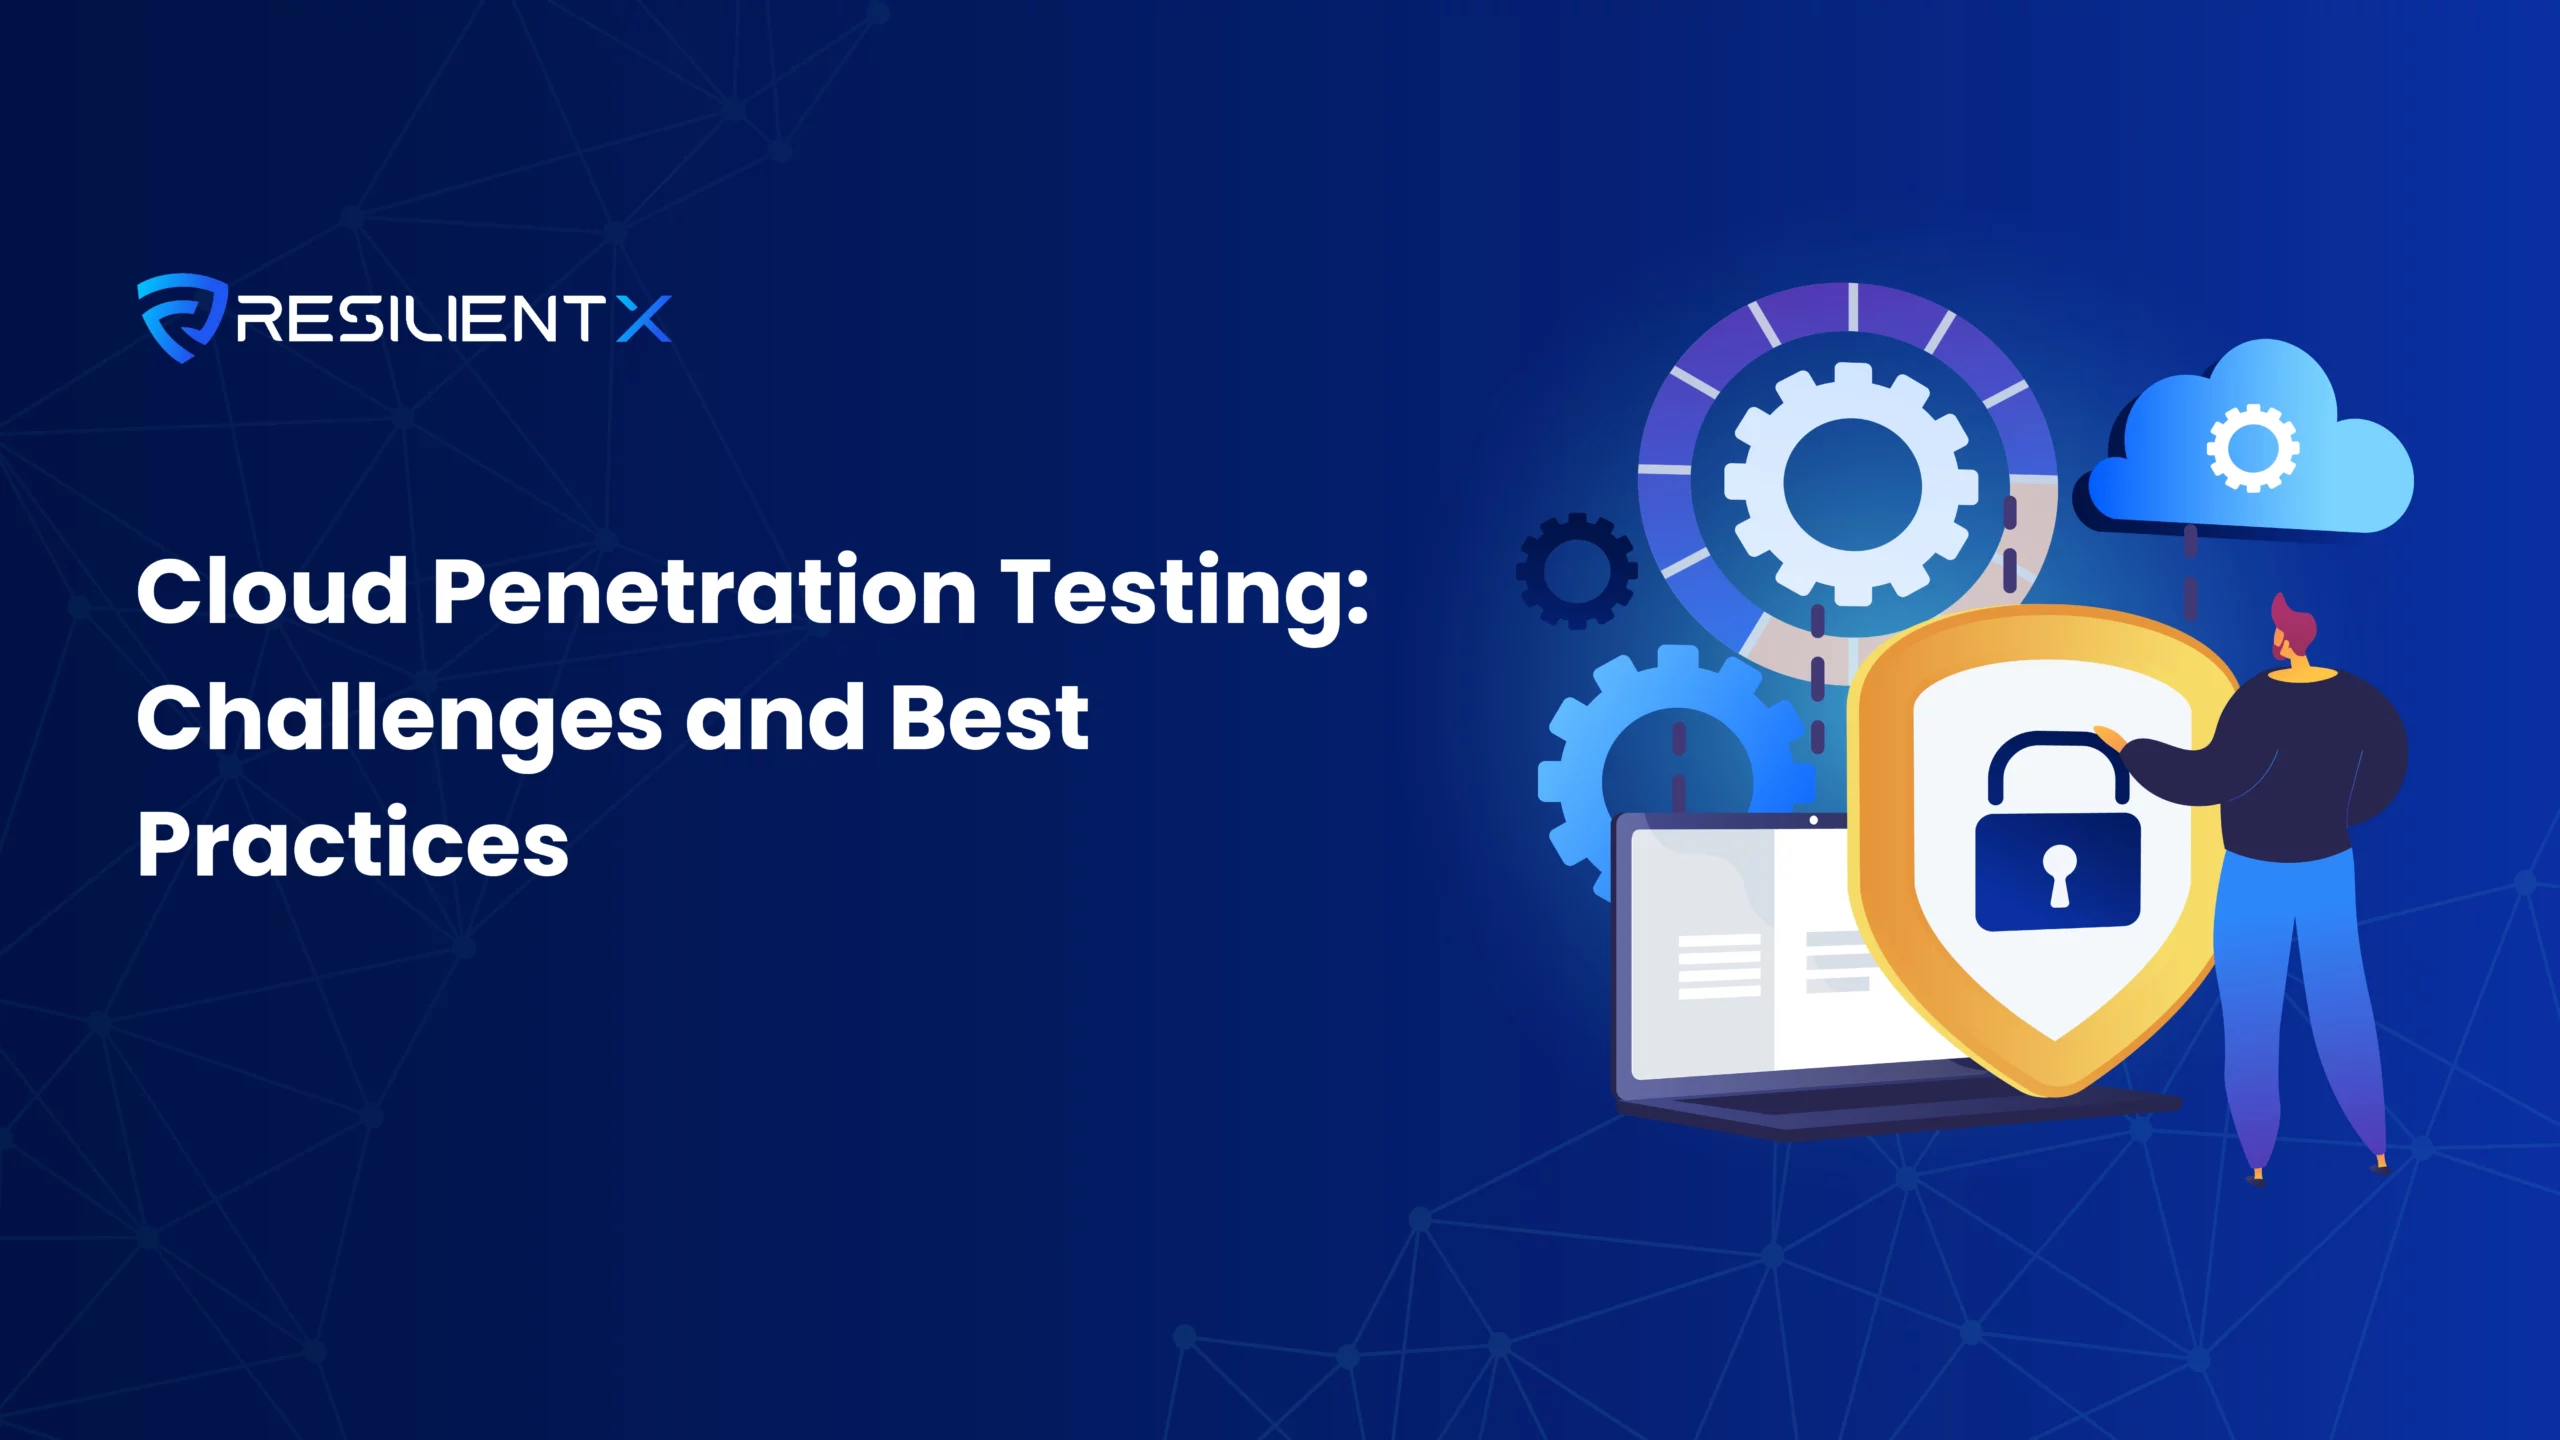 Cloud Penetration Testing Challenges and Best Practices